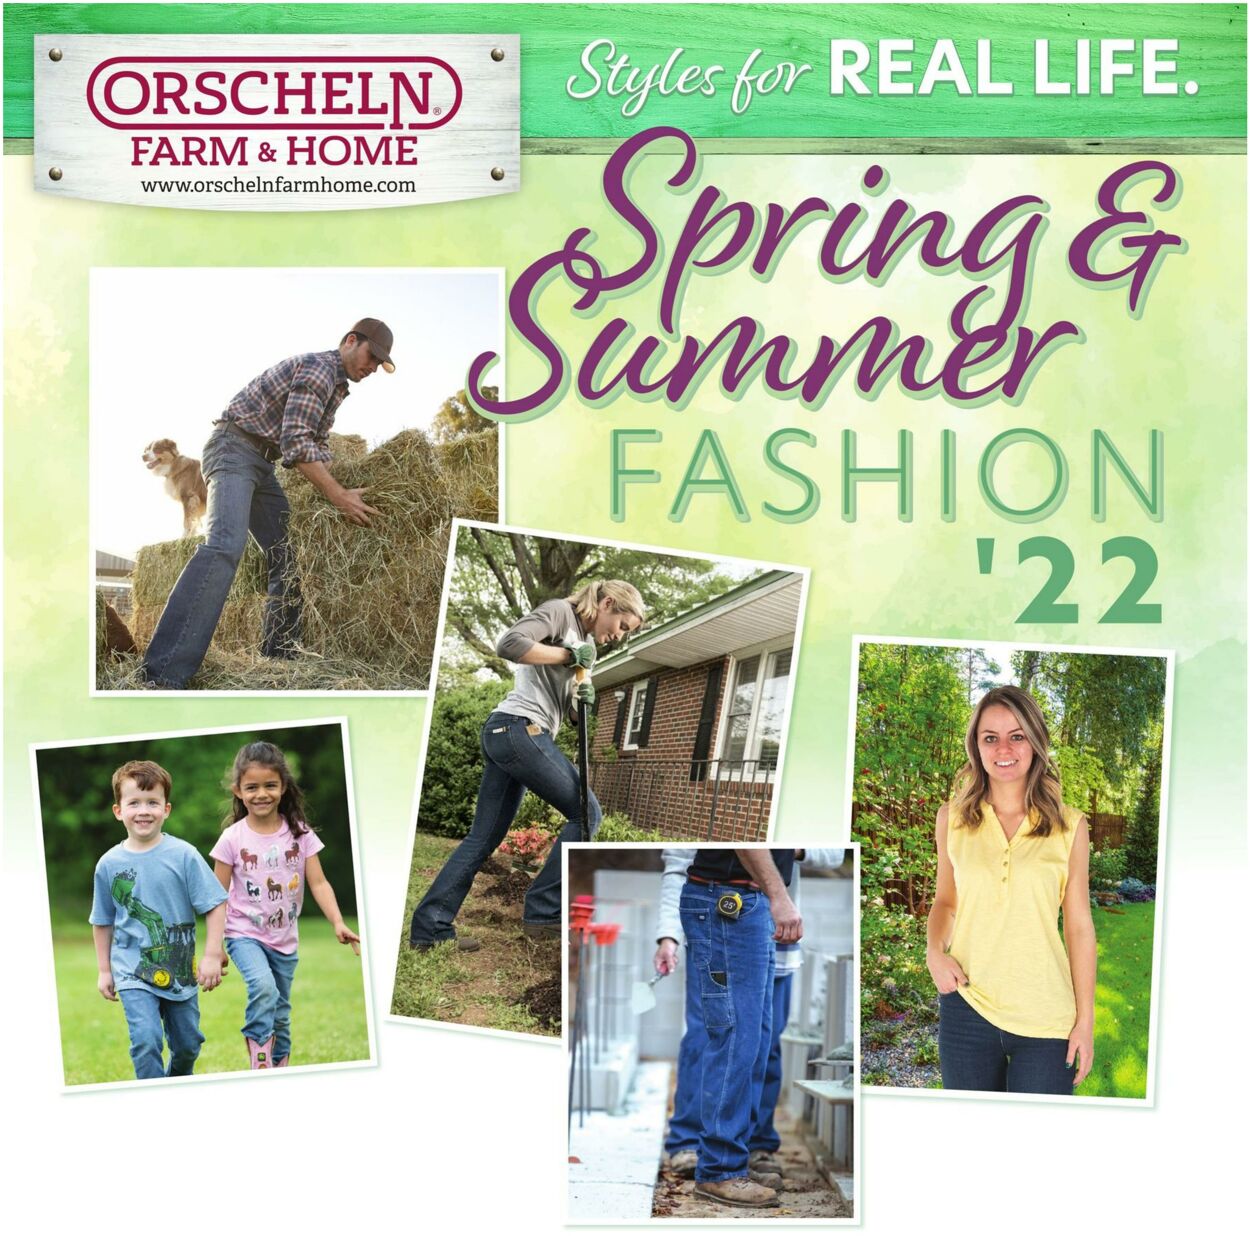 Orscheln Farm & Home Promotional weekly ads